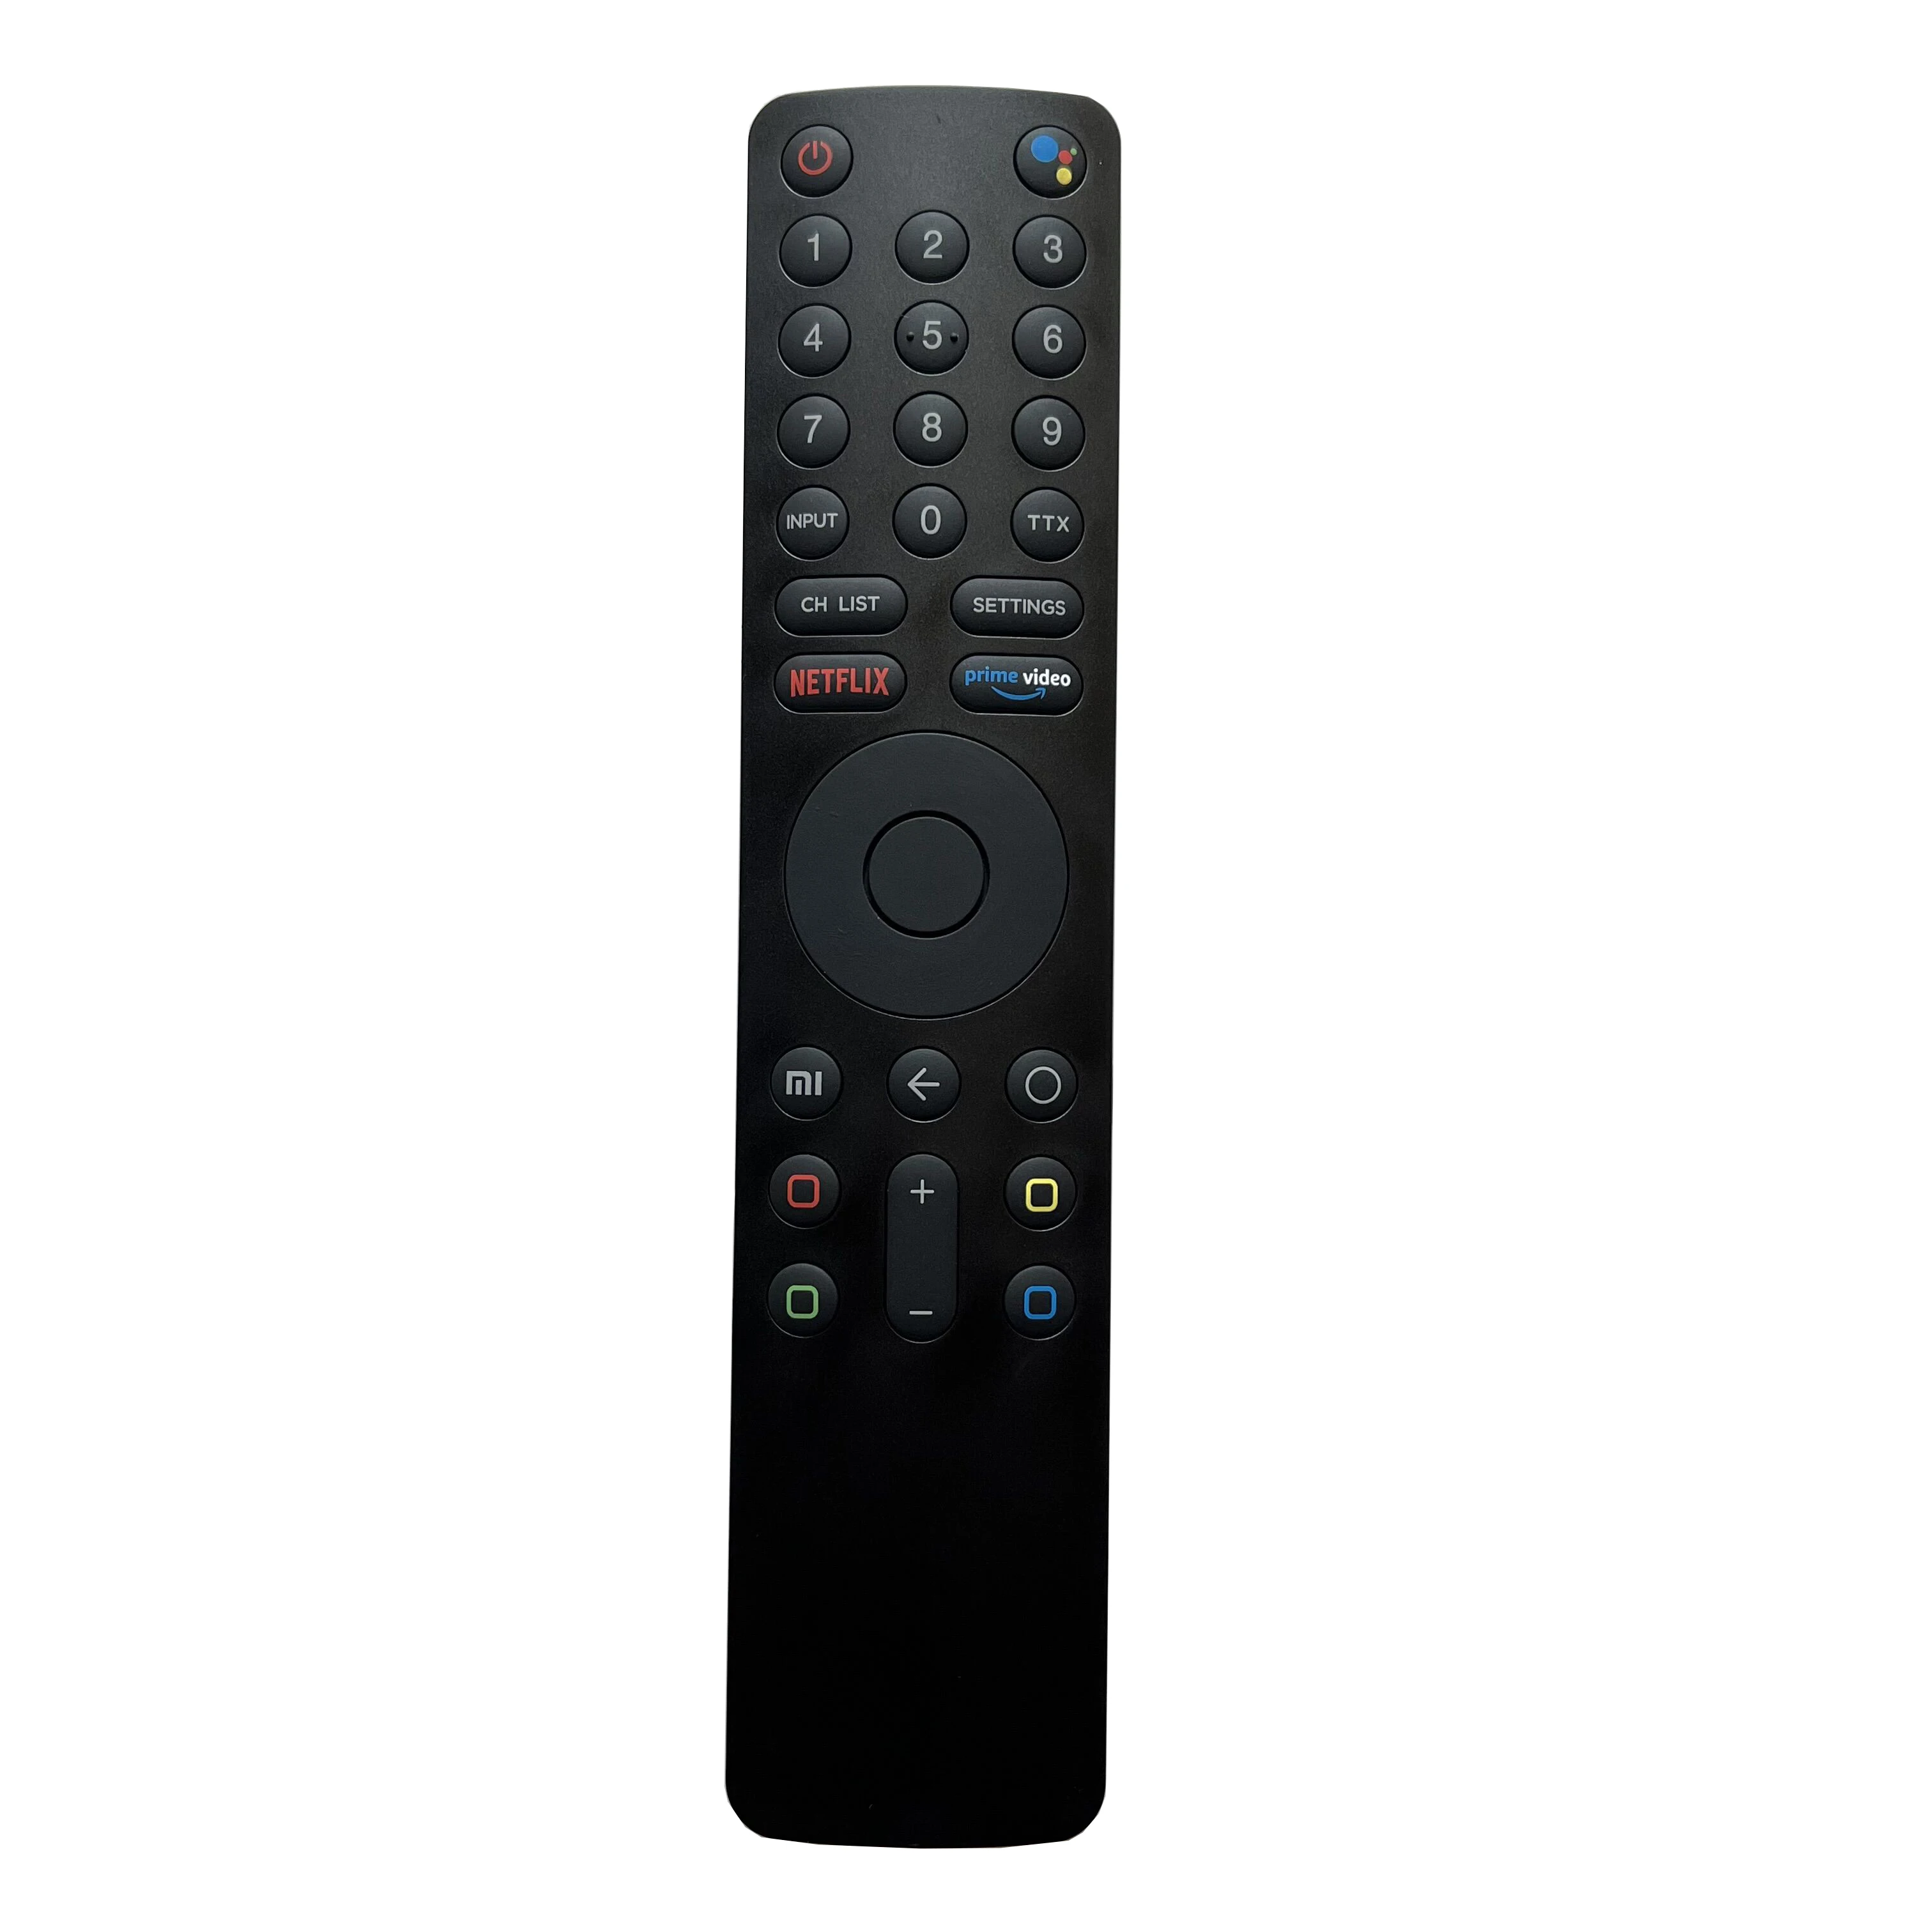 

New XMRM-010 Bluetooth voice remote control FOR Xiaomi Mi smart 4S TV FOR L32M5-5ASP L43M5-5ASP L55M5-5ASP L65M5-5ASP